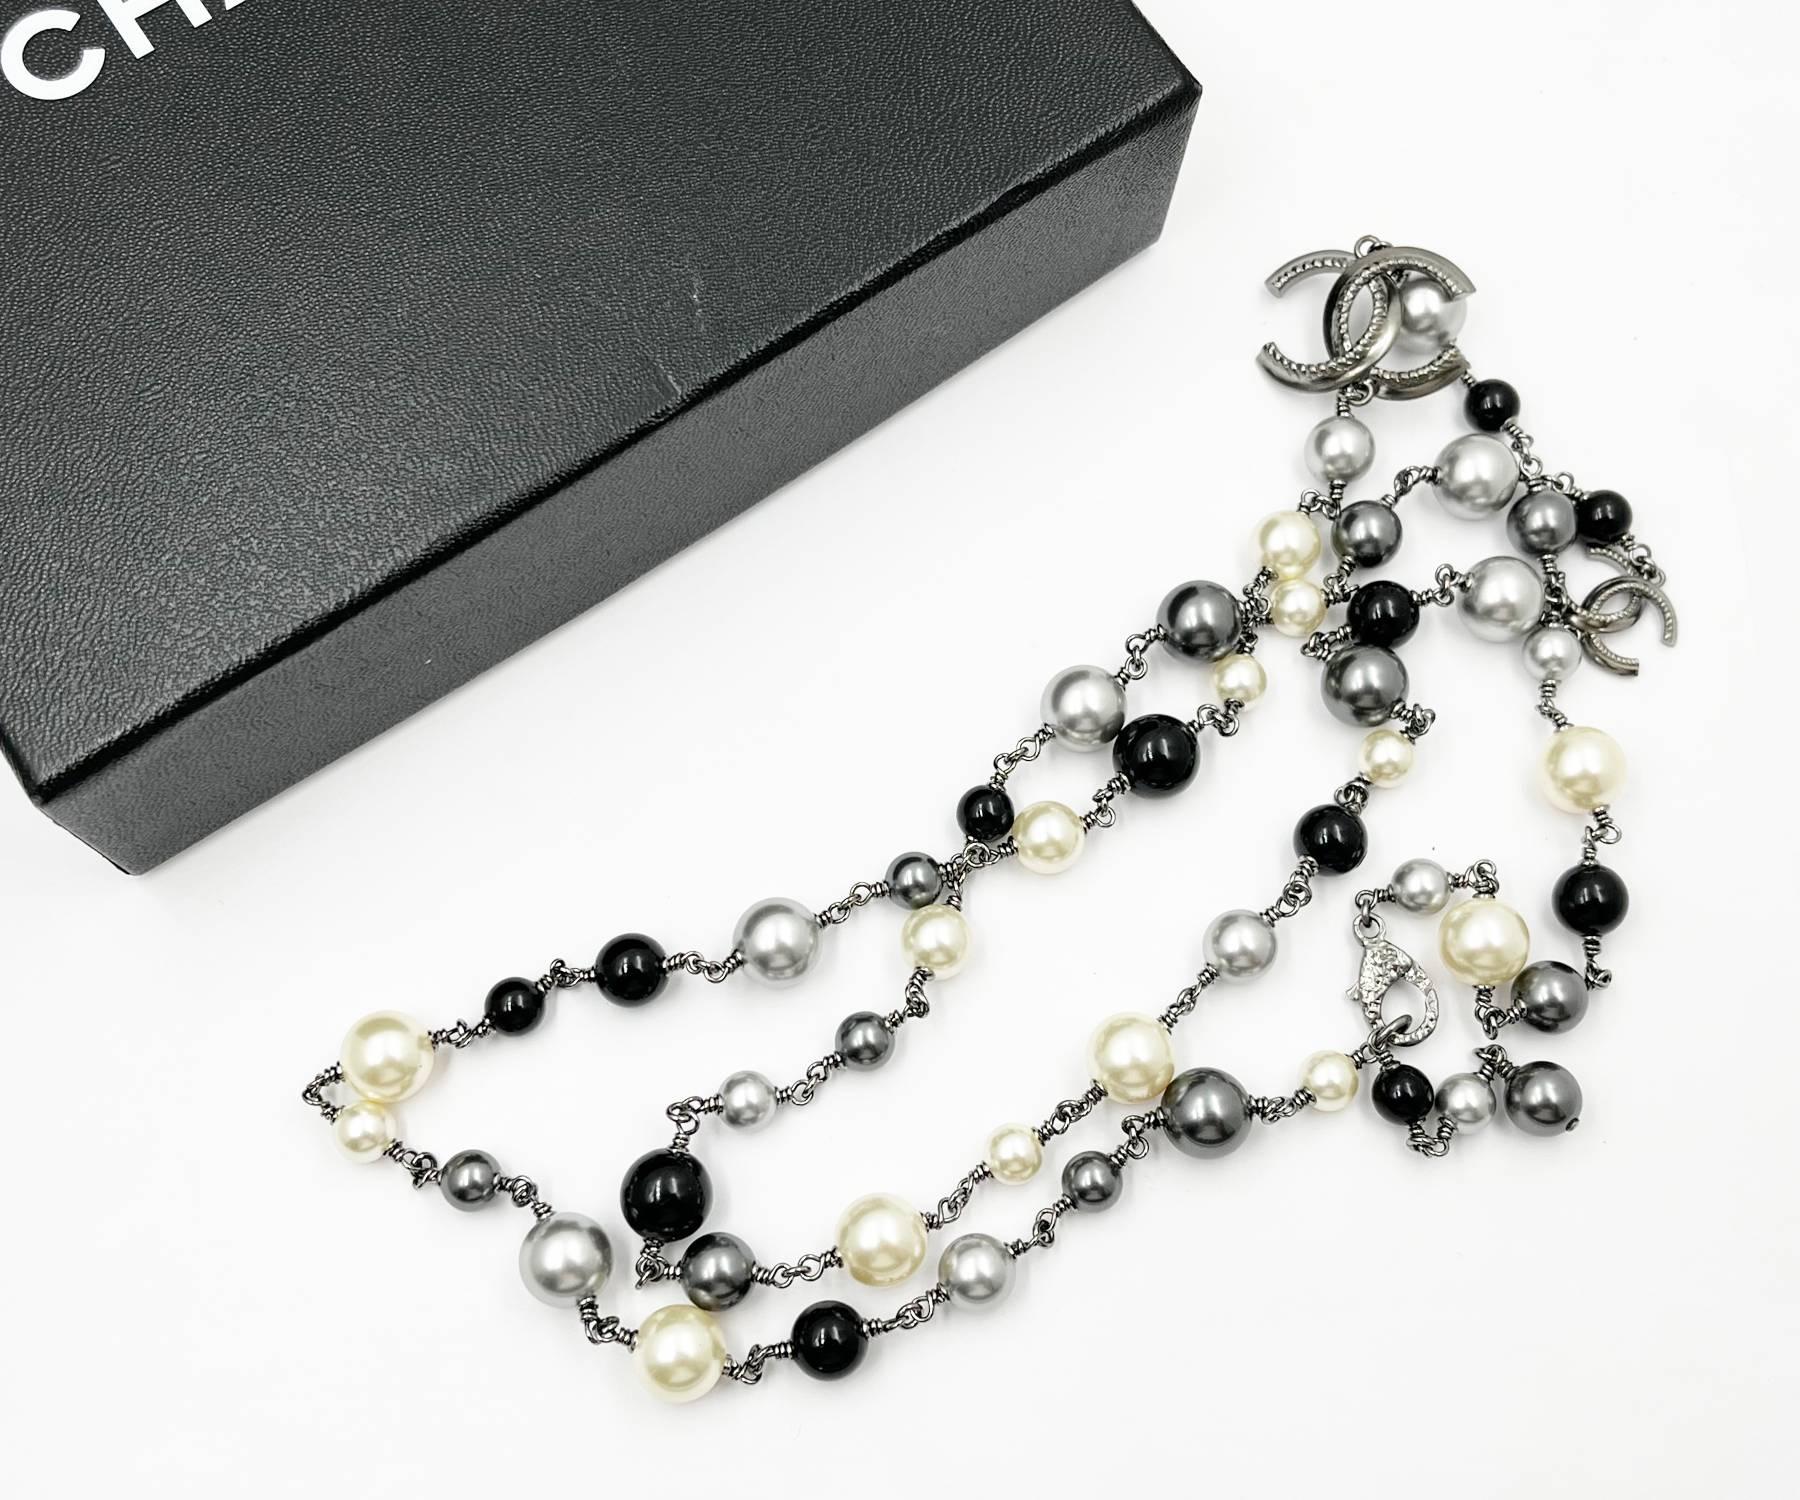 Chanel Gunmetal Rope CC Black Bead Pearl Necklace

*Marked 11
*Made in France
*Comes with original box

-The total length is approximately 44″.
-The largest CC is approximately 1.25″ x 1.1″.
-Wear it as a long necklace or wrap it double as a short